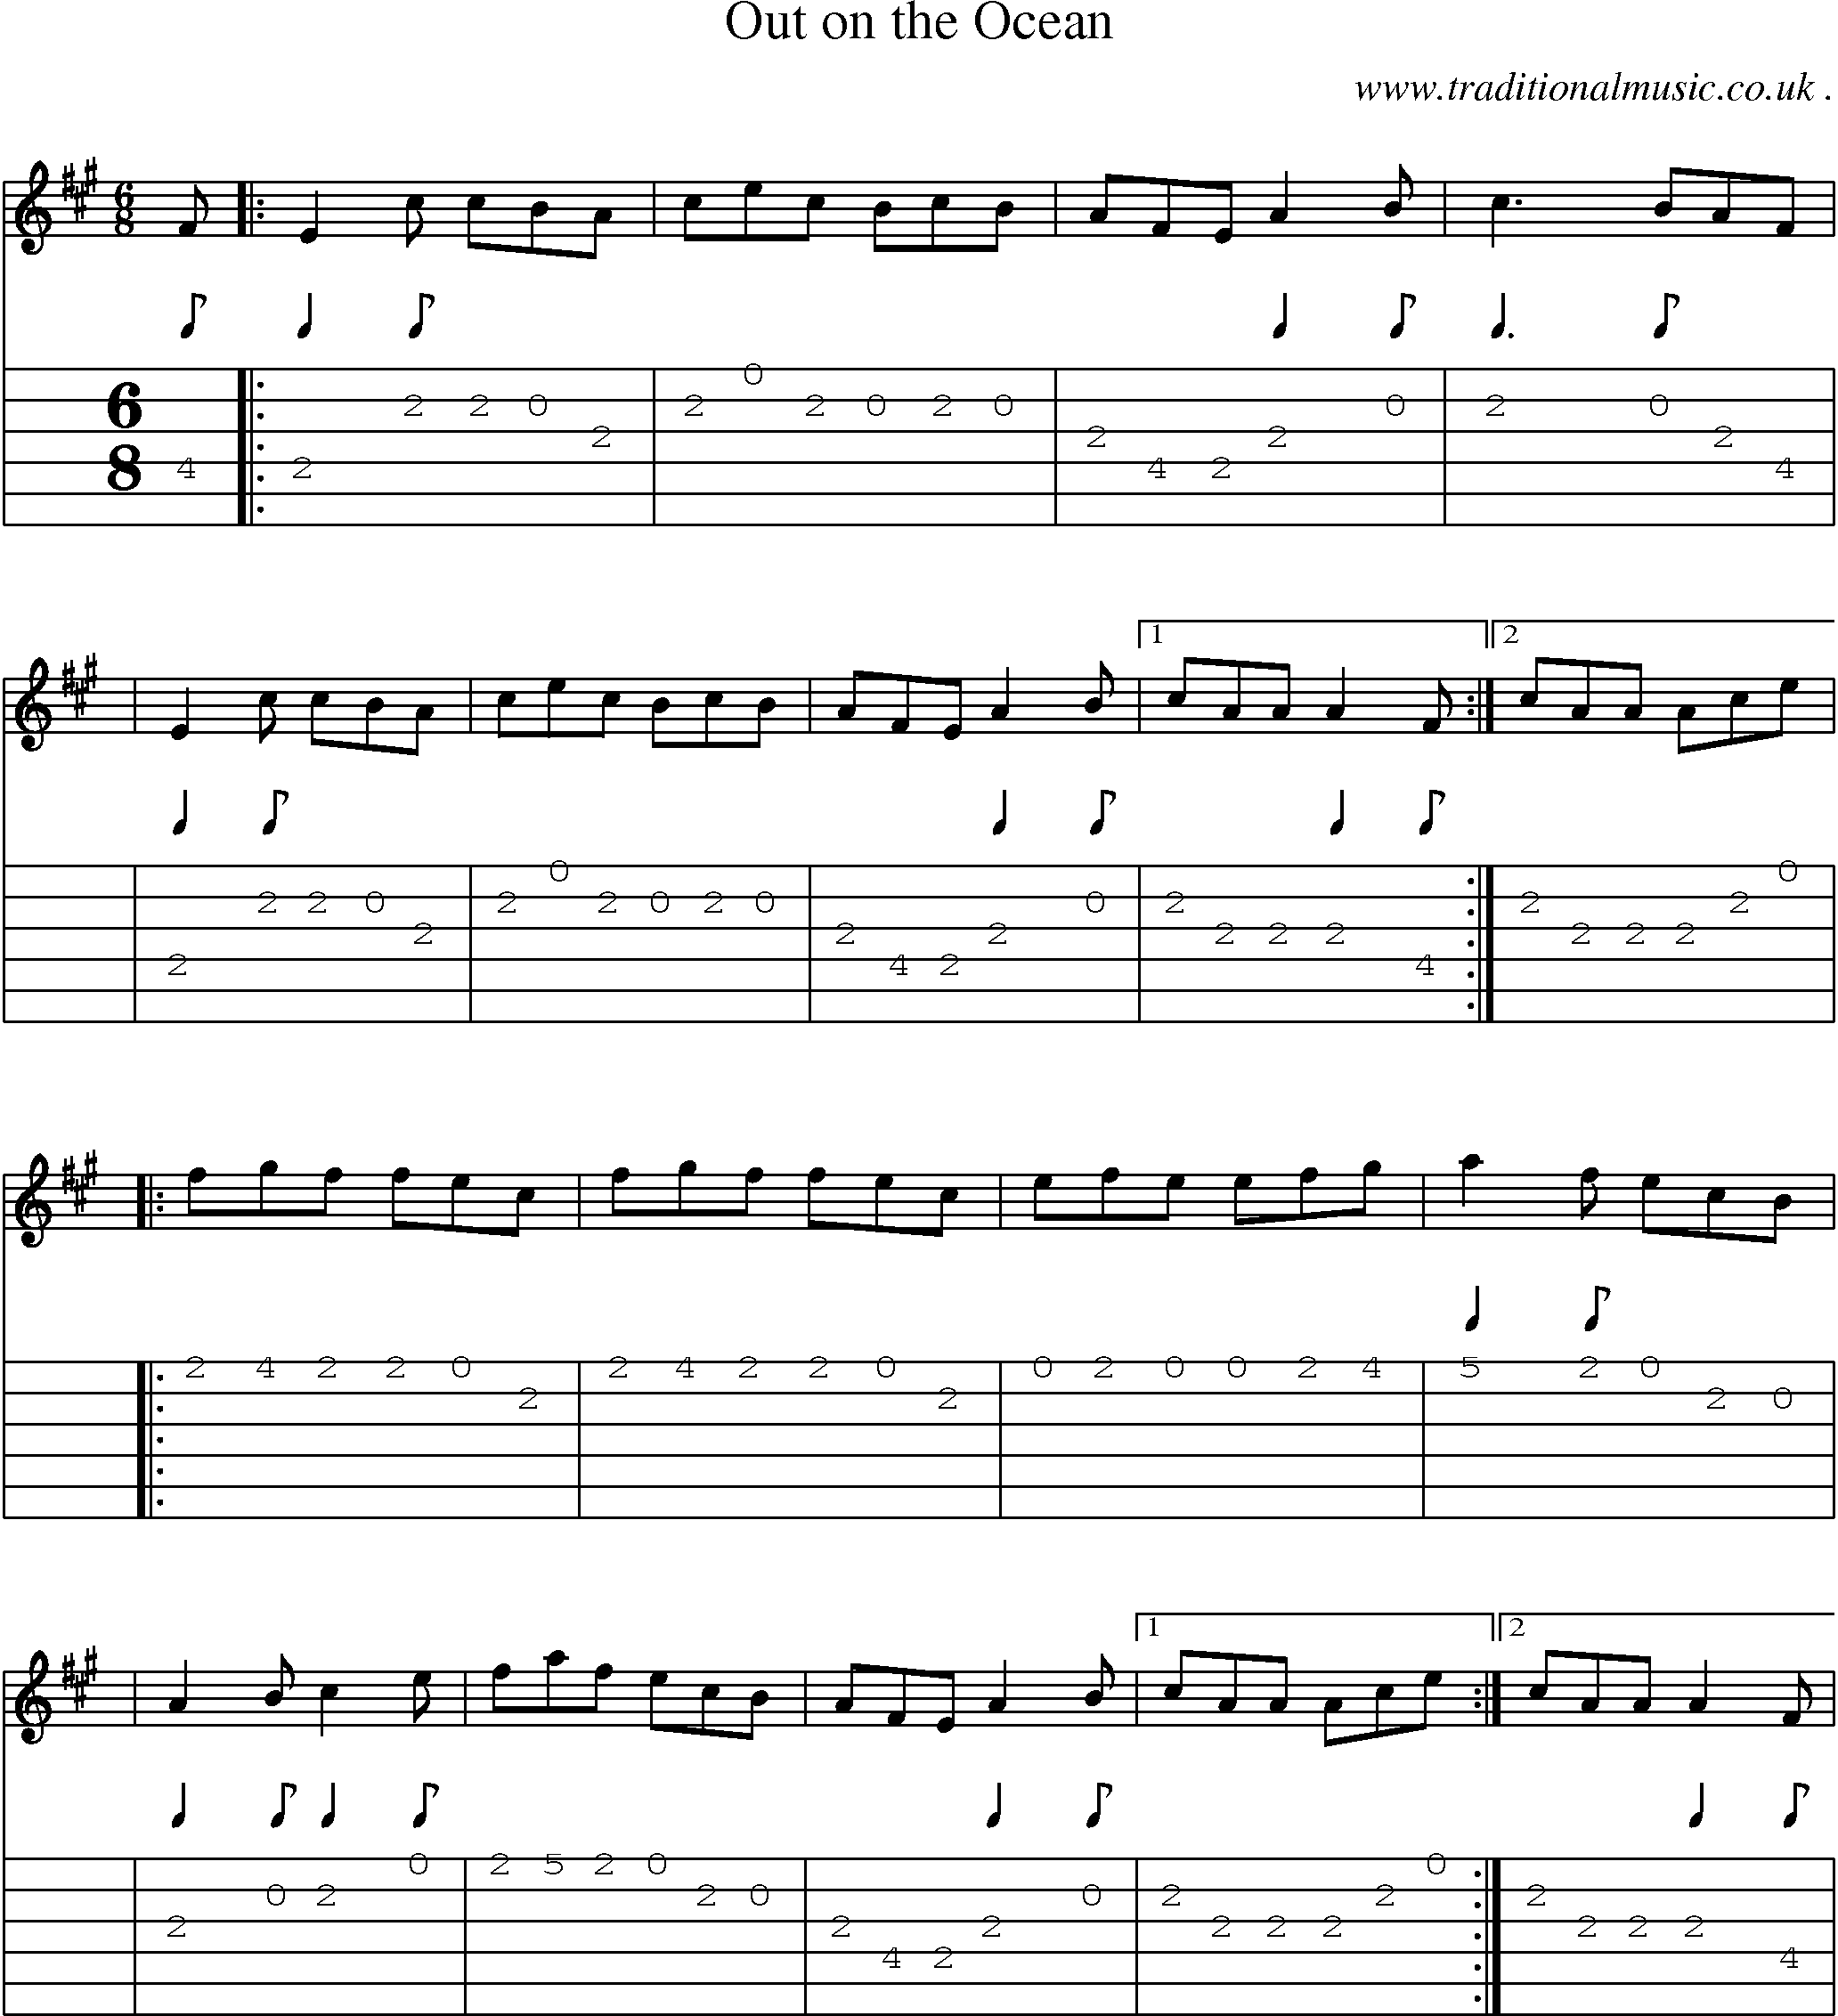 Sheet-Music and Guitar Tabs for Out on the Ocean 